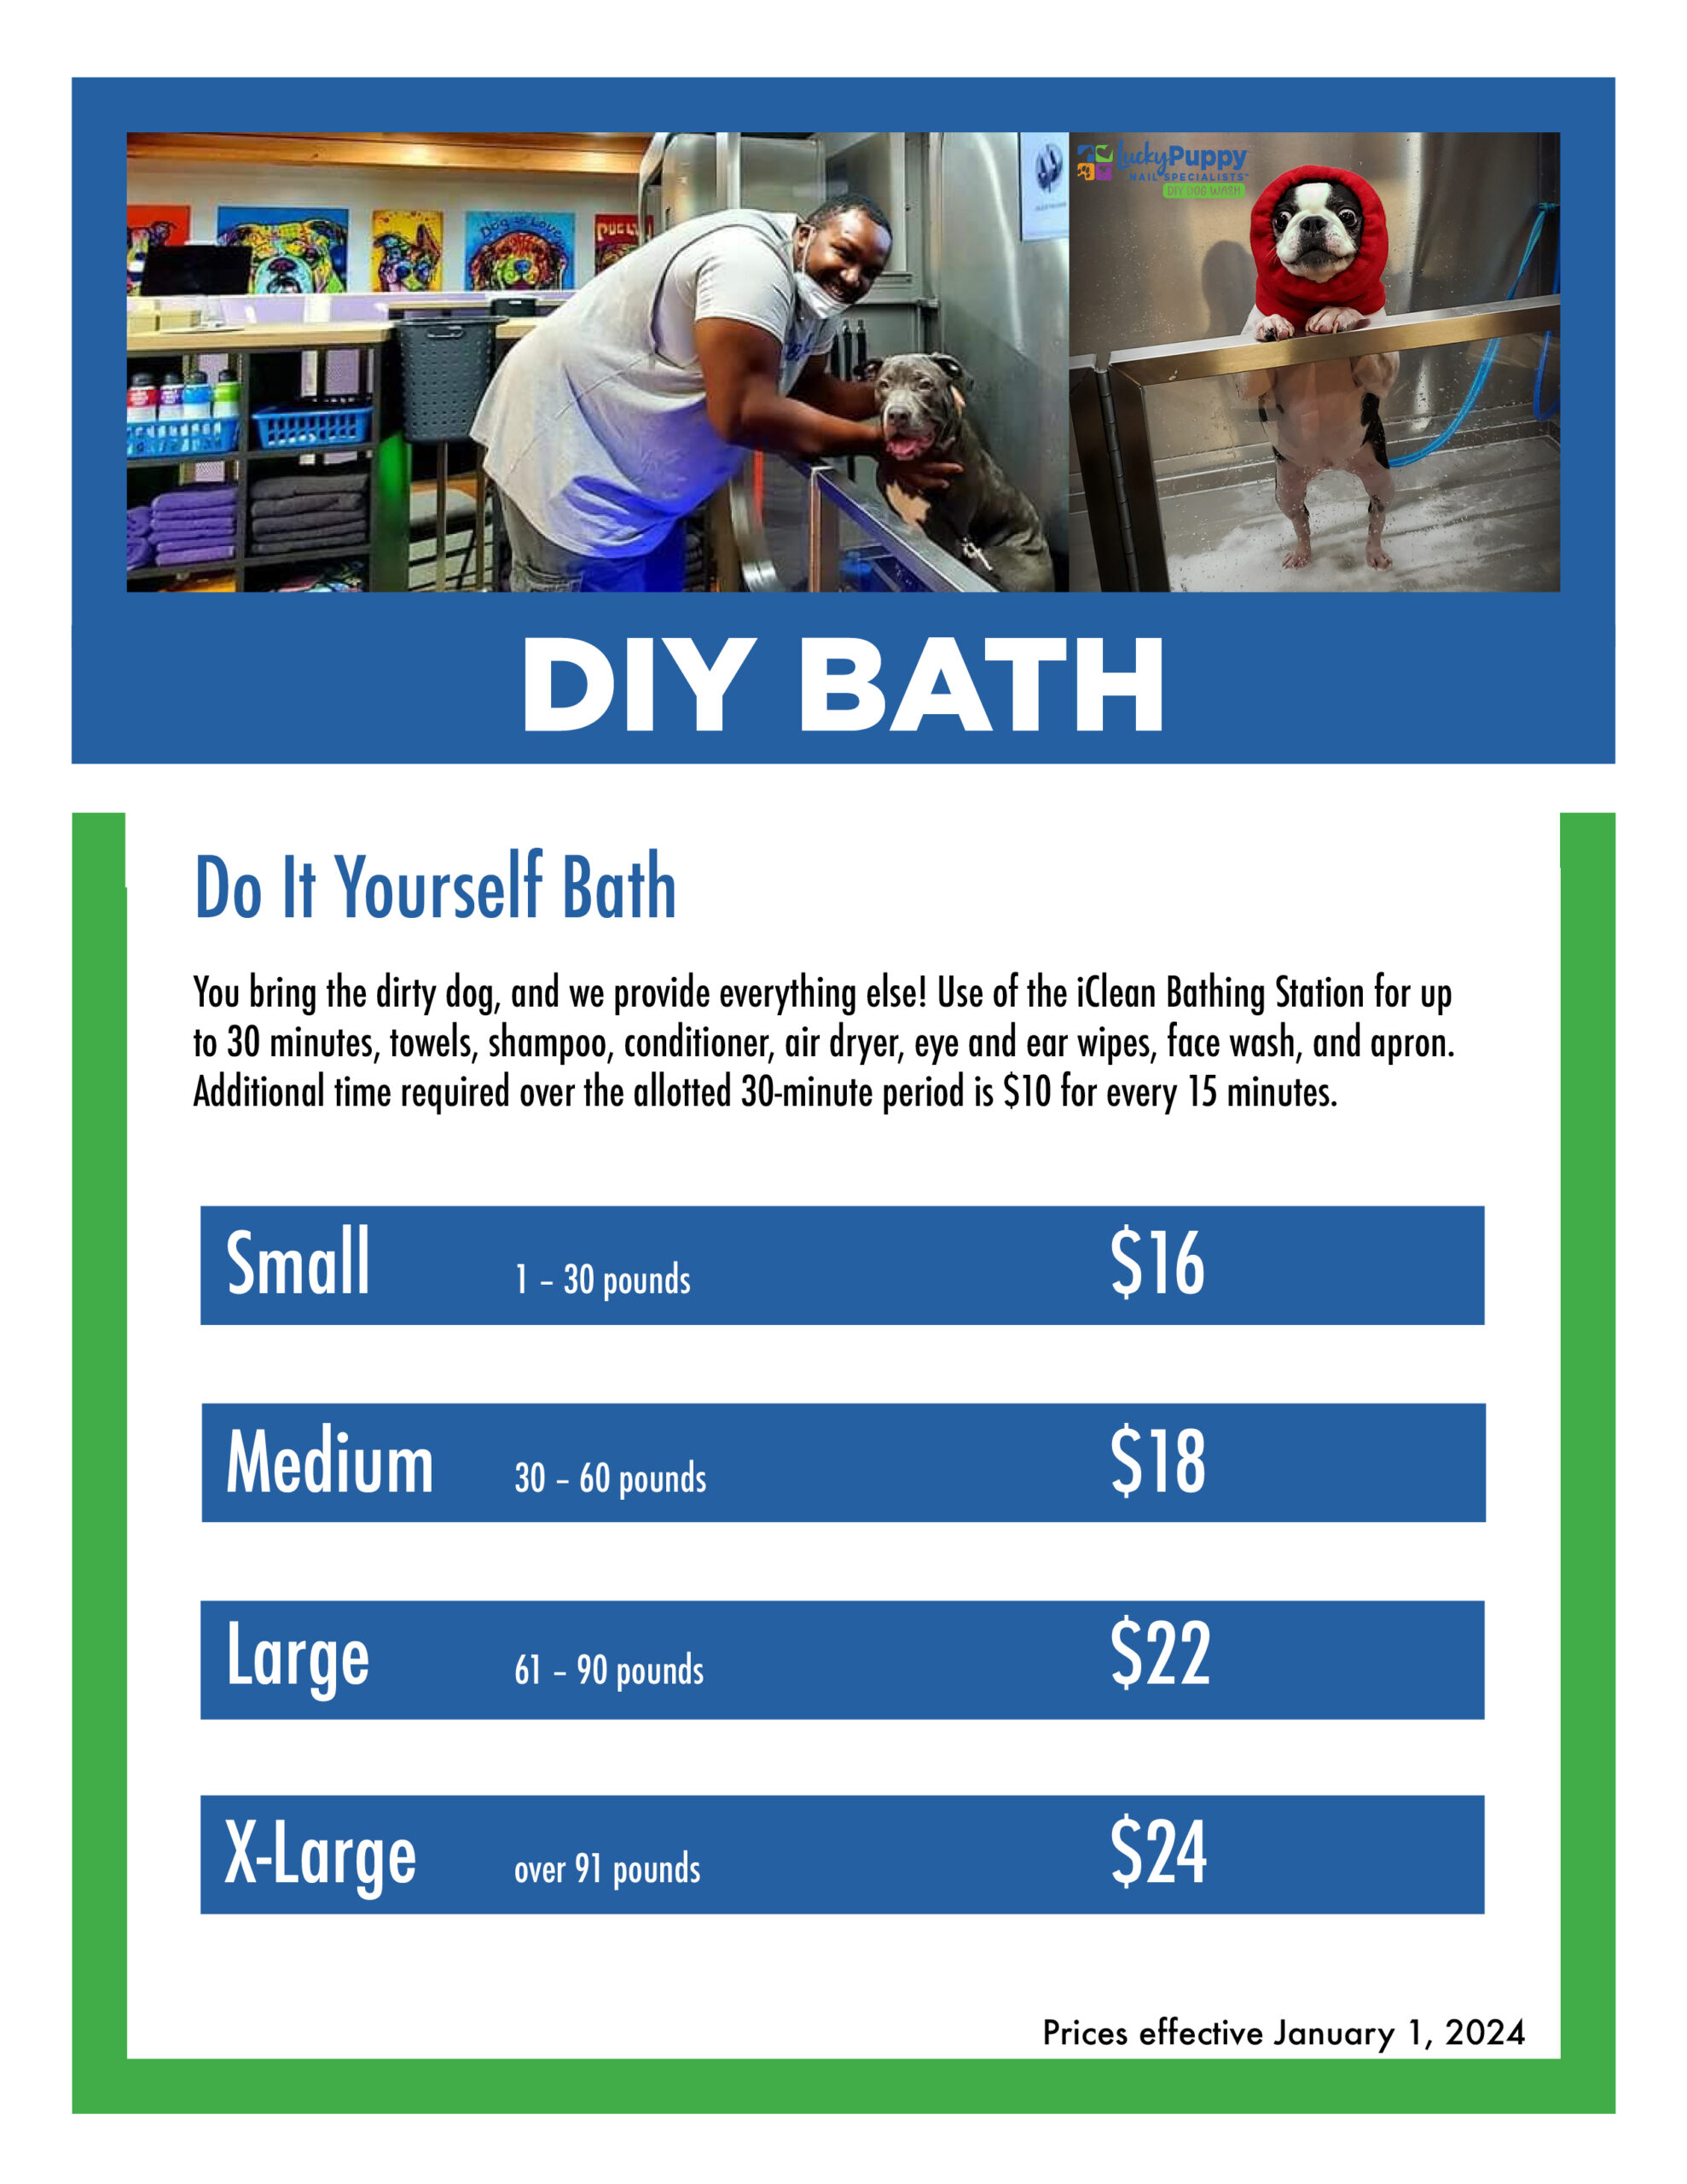 Lucky Puppy Nail Specialists DIY Bath Prices